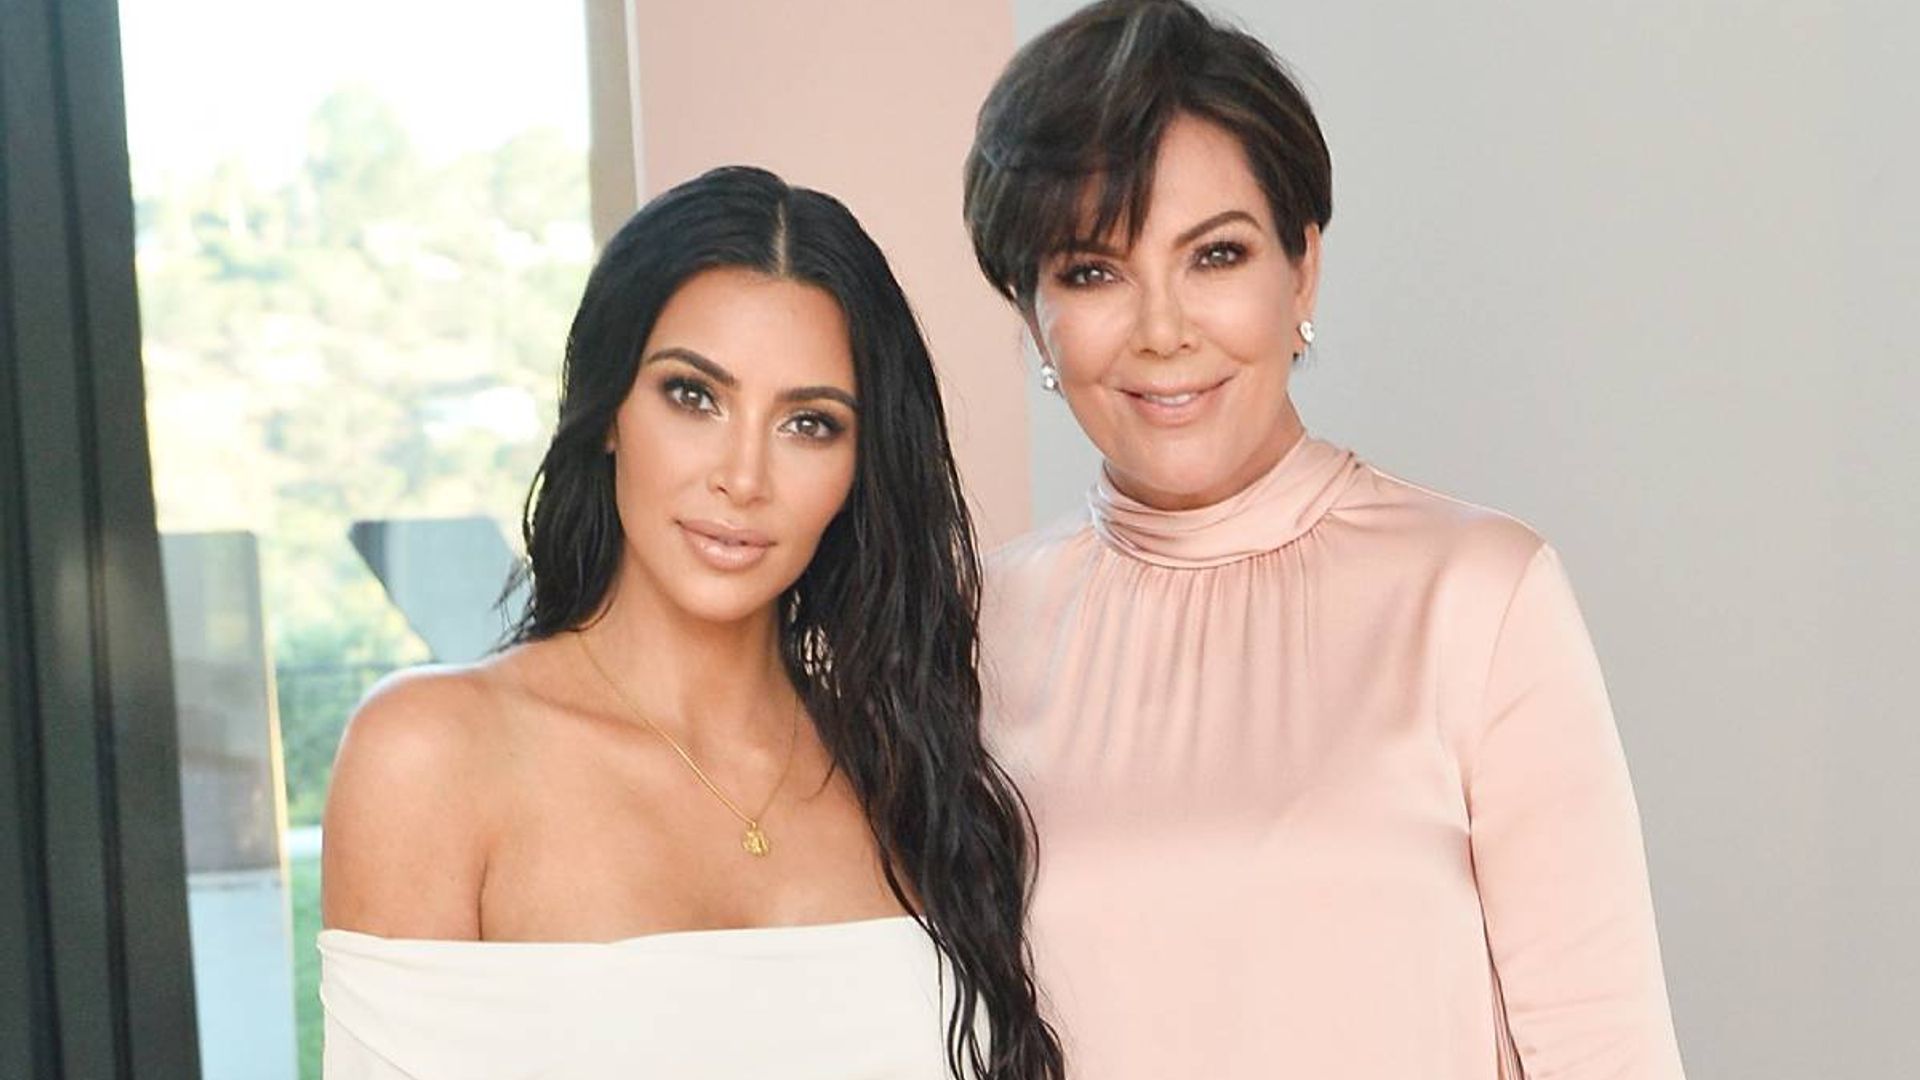 Kris Jenner looks unrecognisable with long hair and a fringe